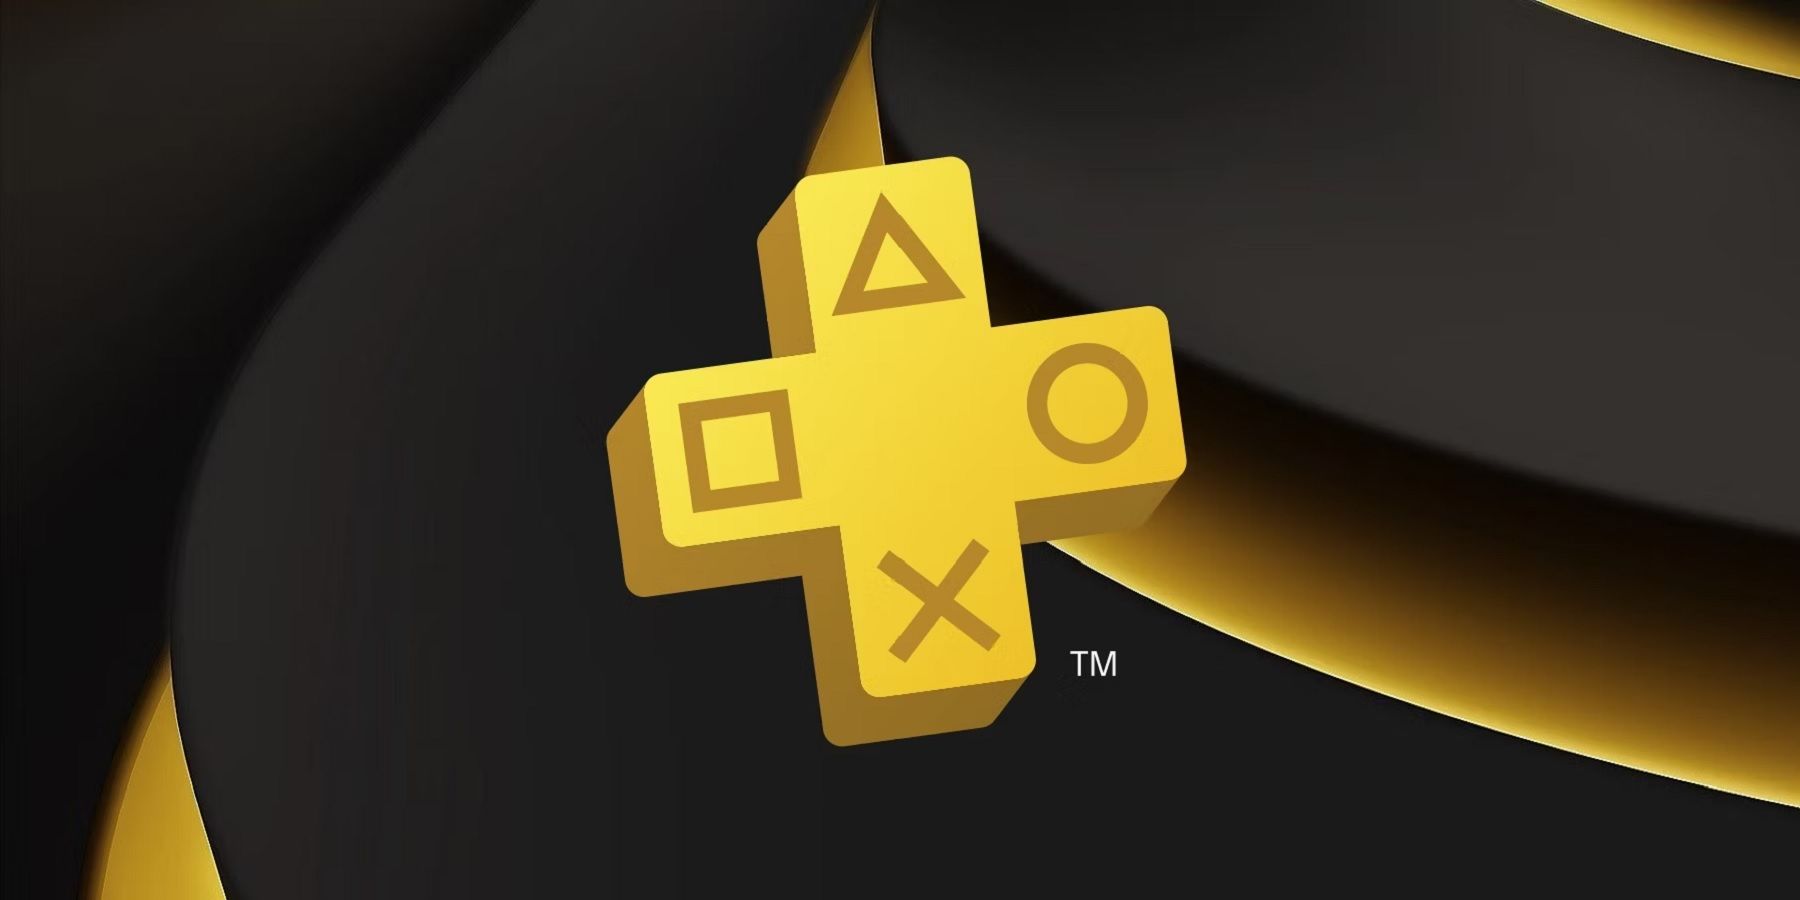 ps plus logo with black and yellow background